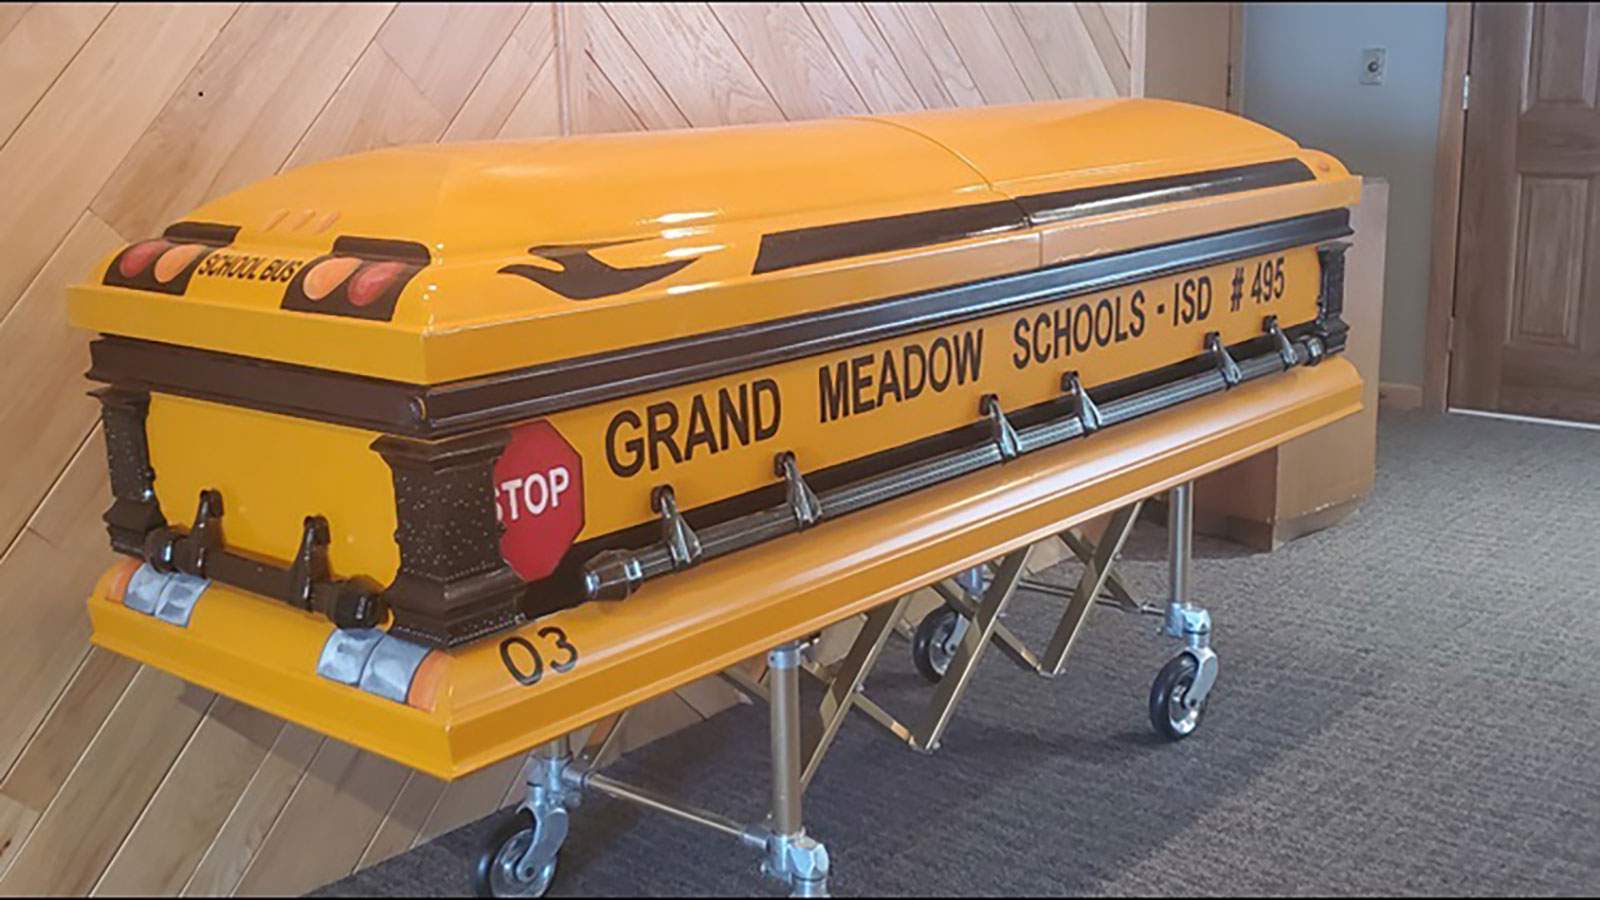 A man who drove a school bus for 55 years will be laid to rest in a school bus casket